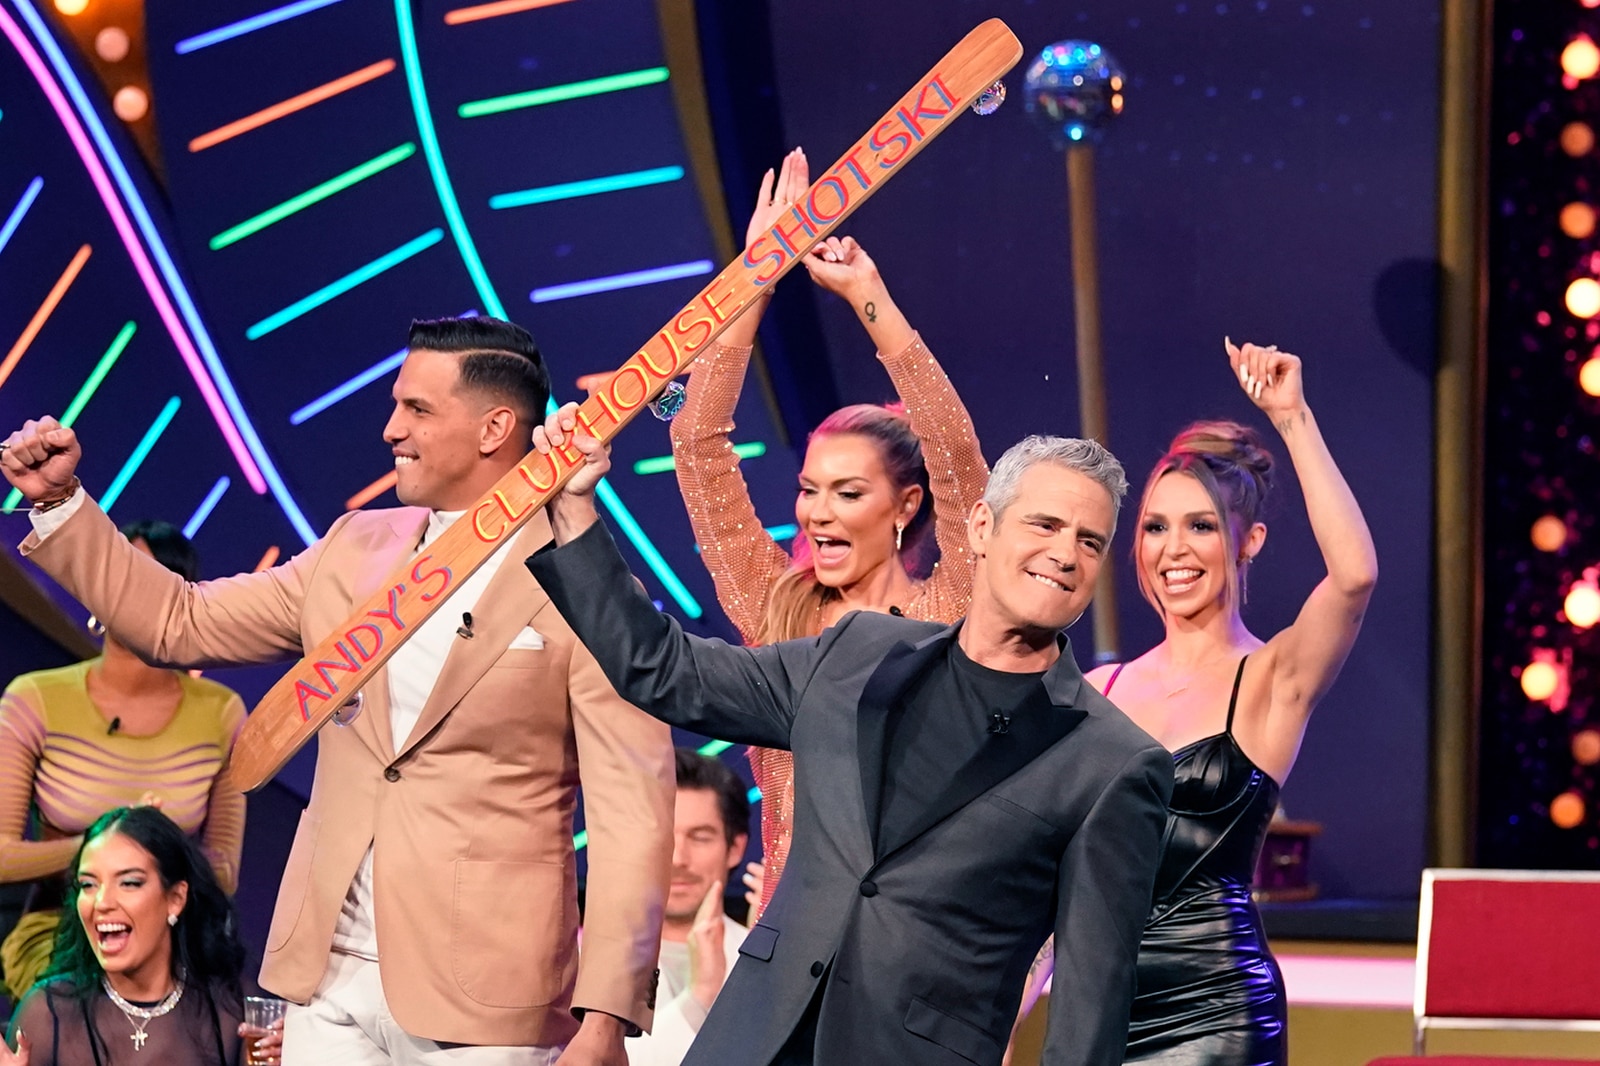 Andy Cohen holding the WWHL Shotski while on stage with Shouthern Charm, Vanderpump Rules, and Winter House casts.